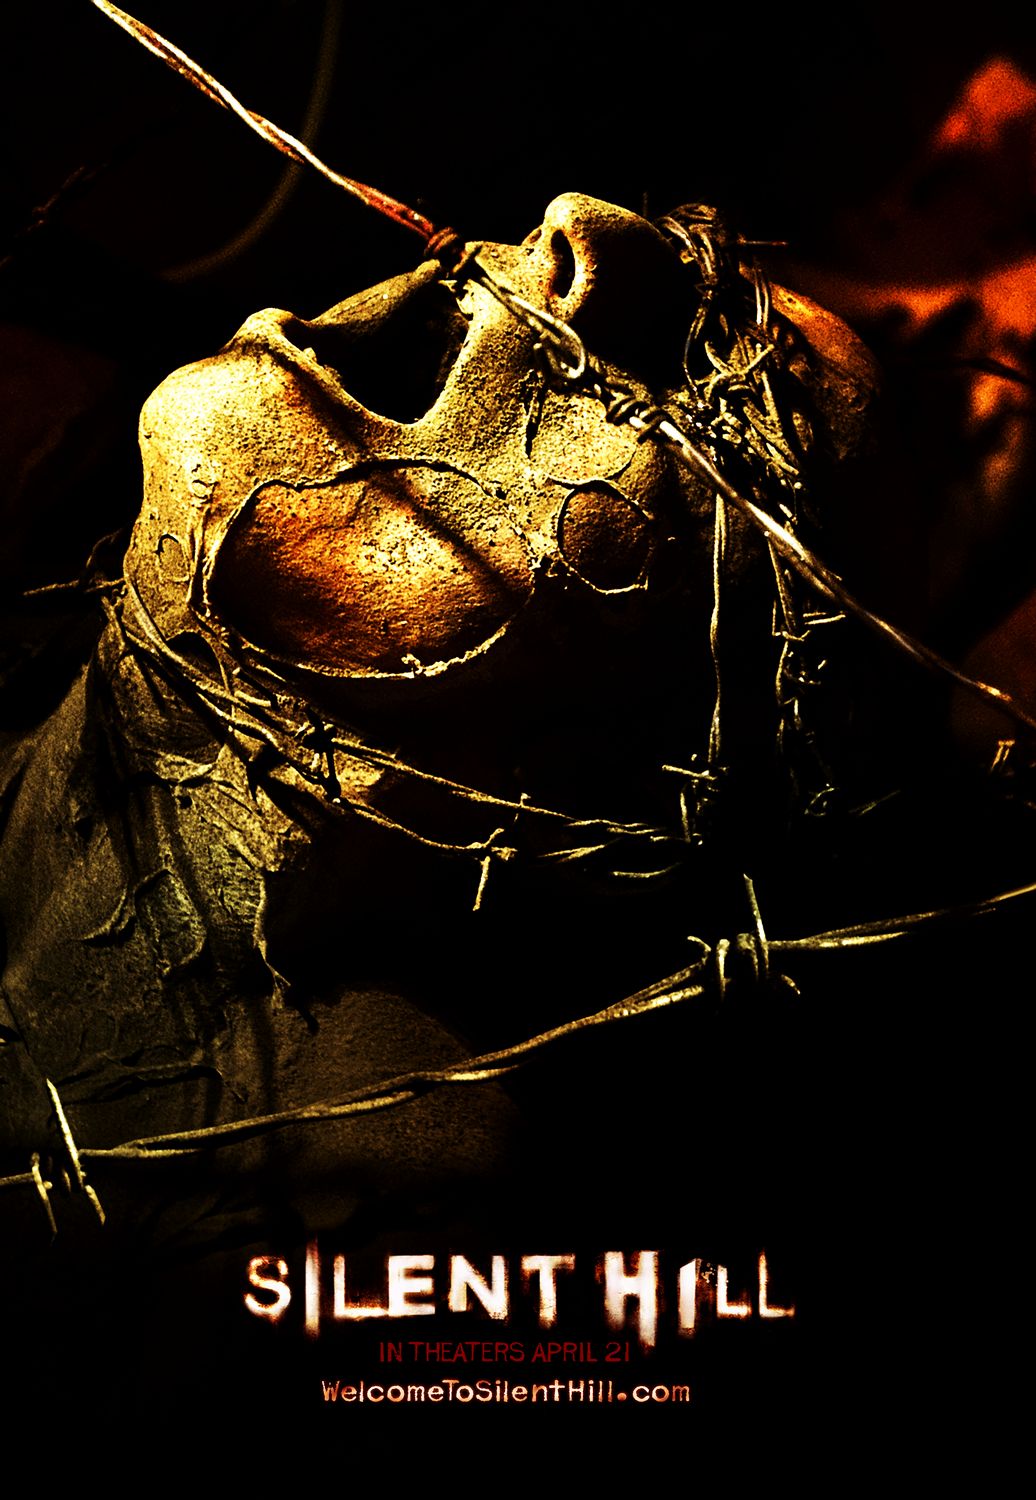 Extra Large Movie Poster Image for Silent Hill (#9 of 11)